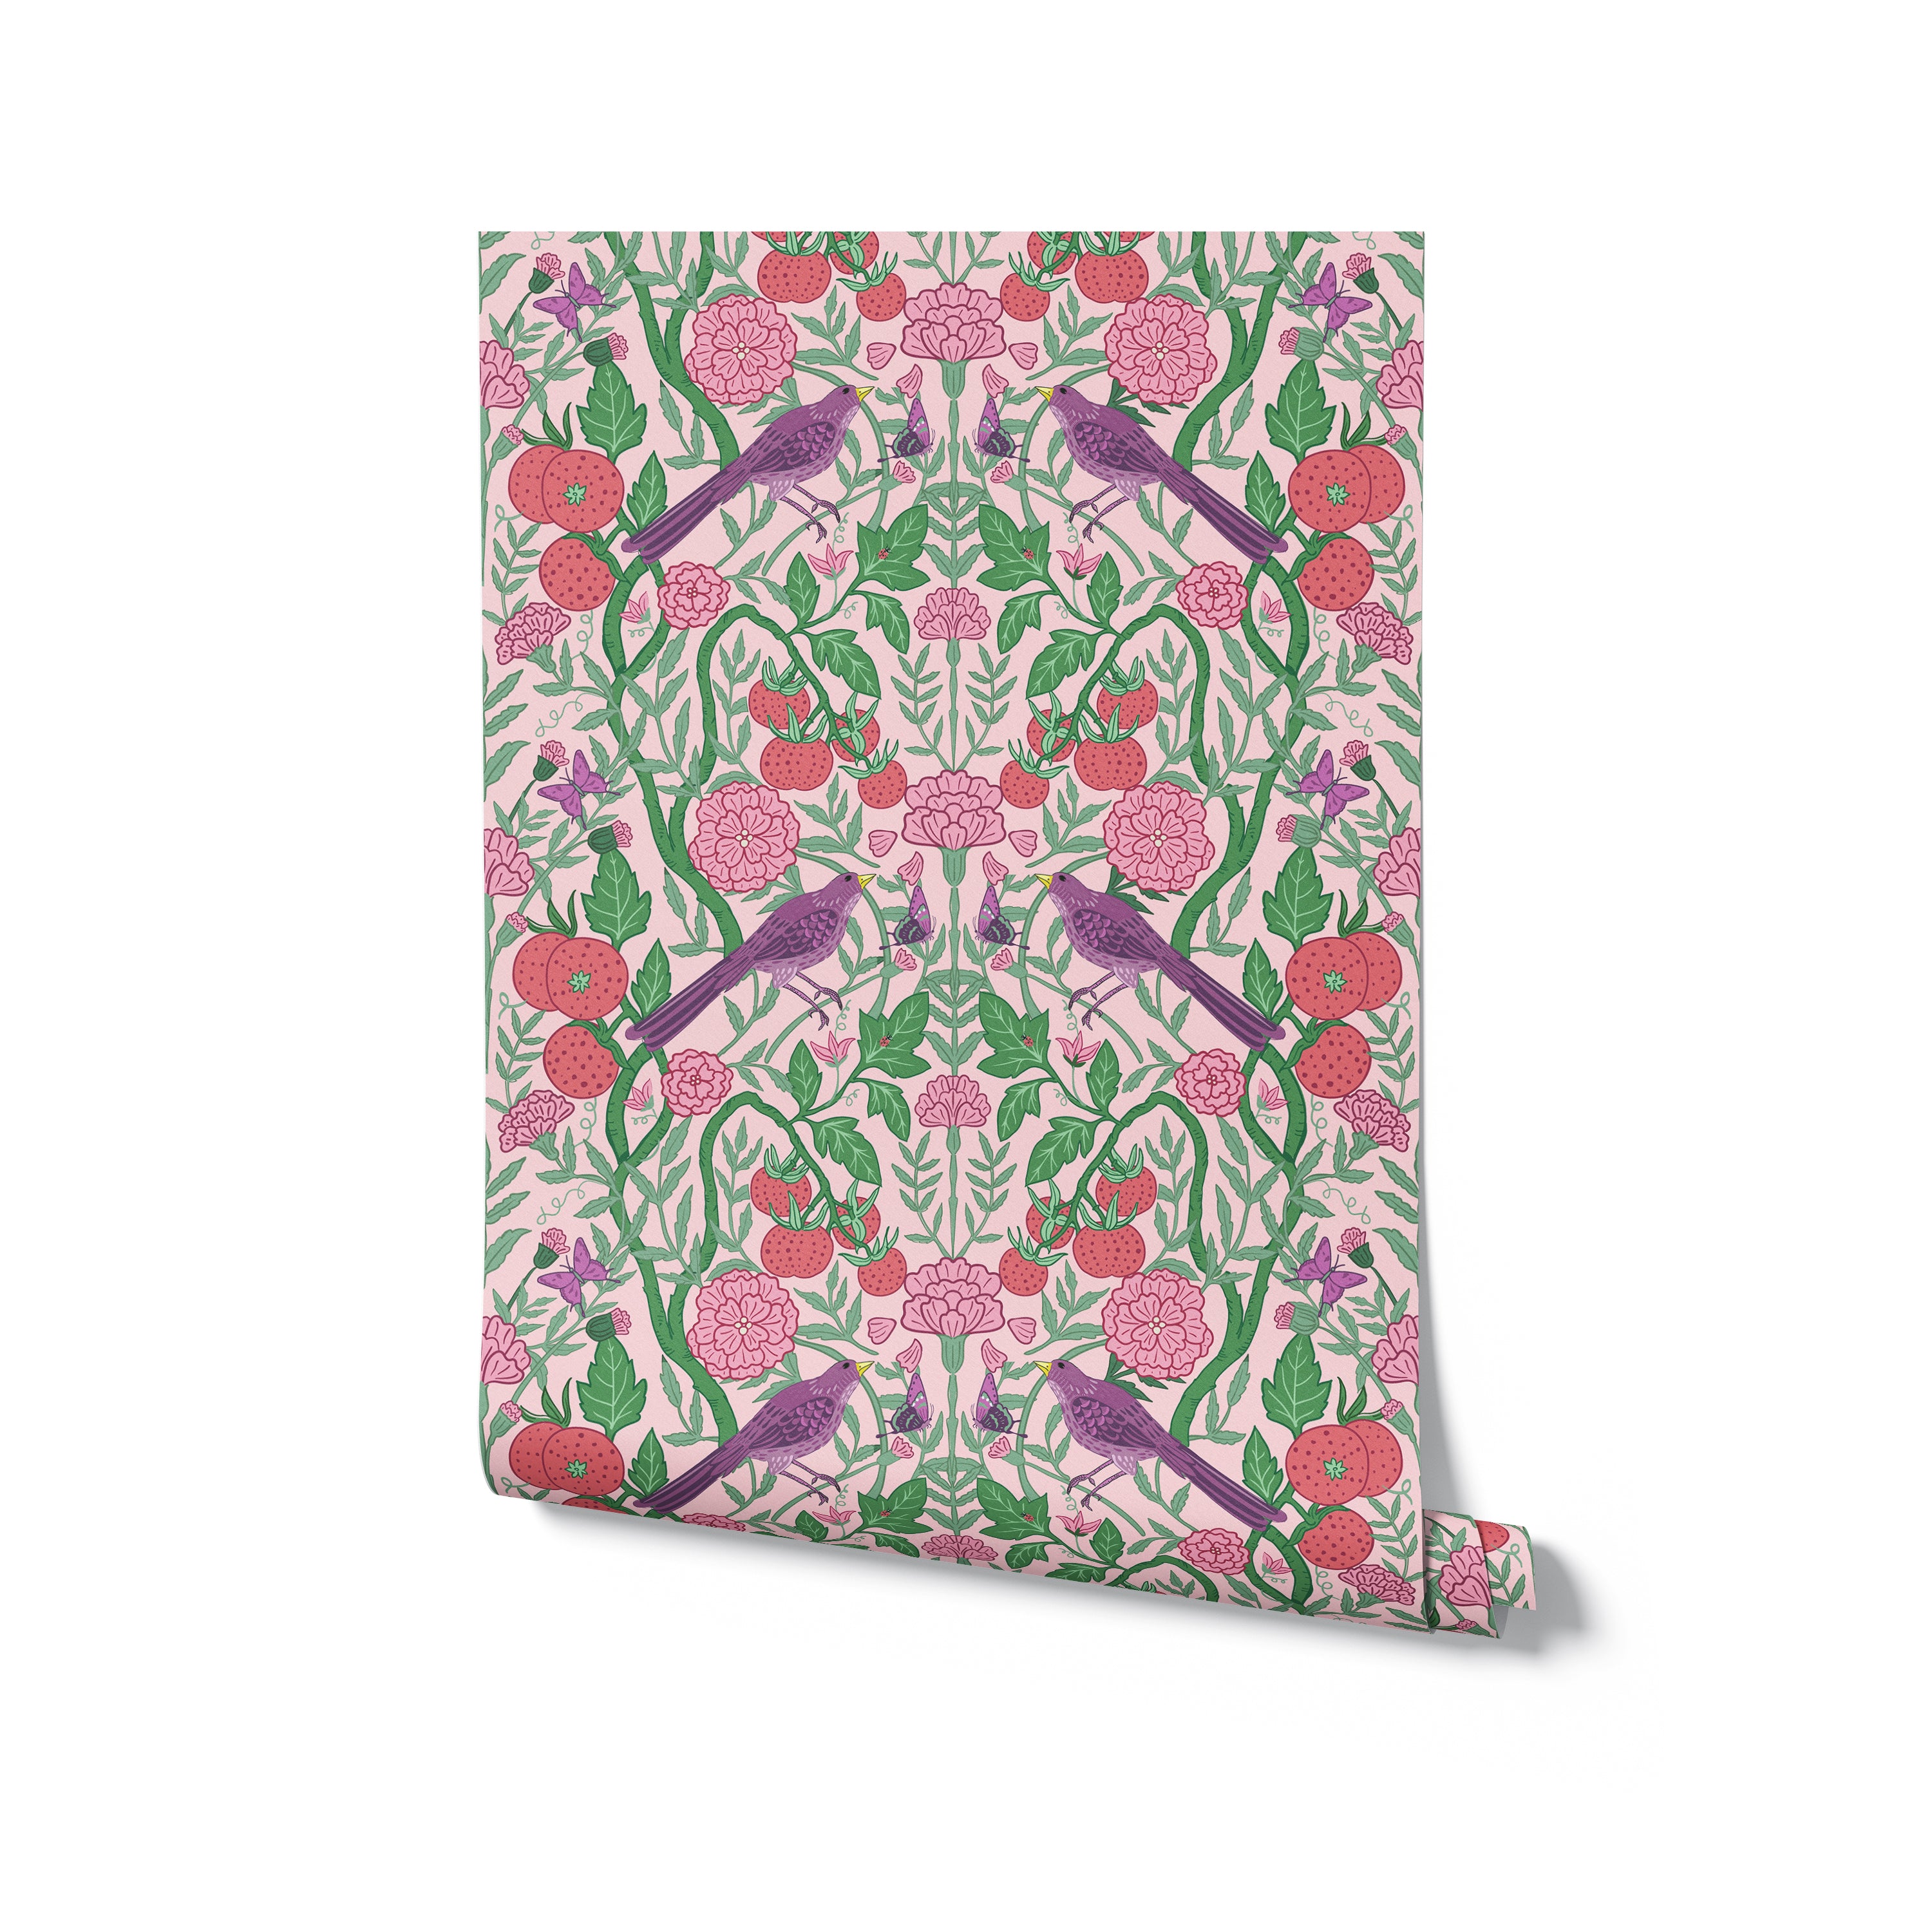 Seamless wallpaper pattern featuring an intricate design of strawberries, flowers, and birds in a stylized garden setting. The background is soft pink, with elements in shades of green, red, and purple, ideal for a lively and cheerful room decor."